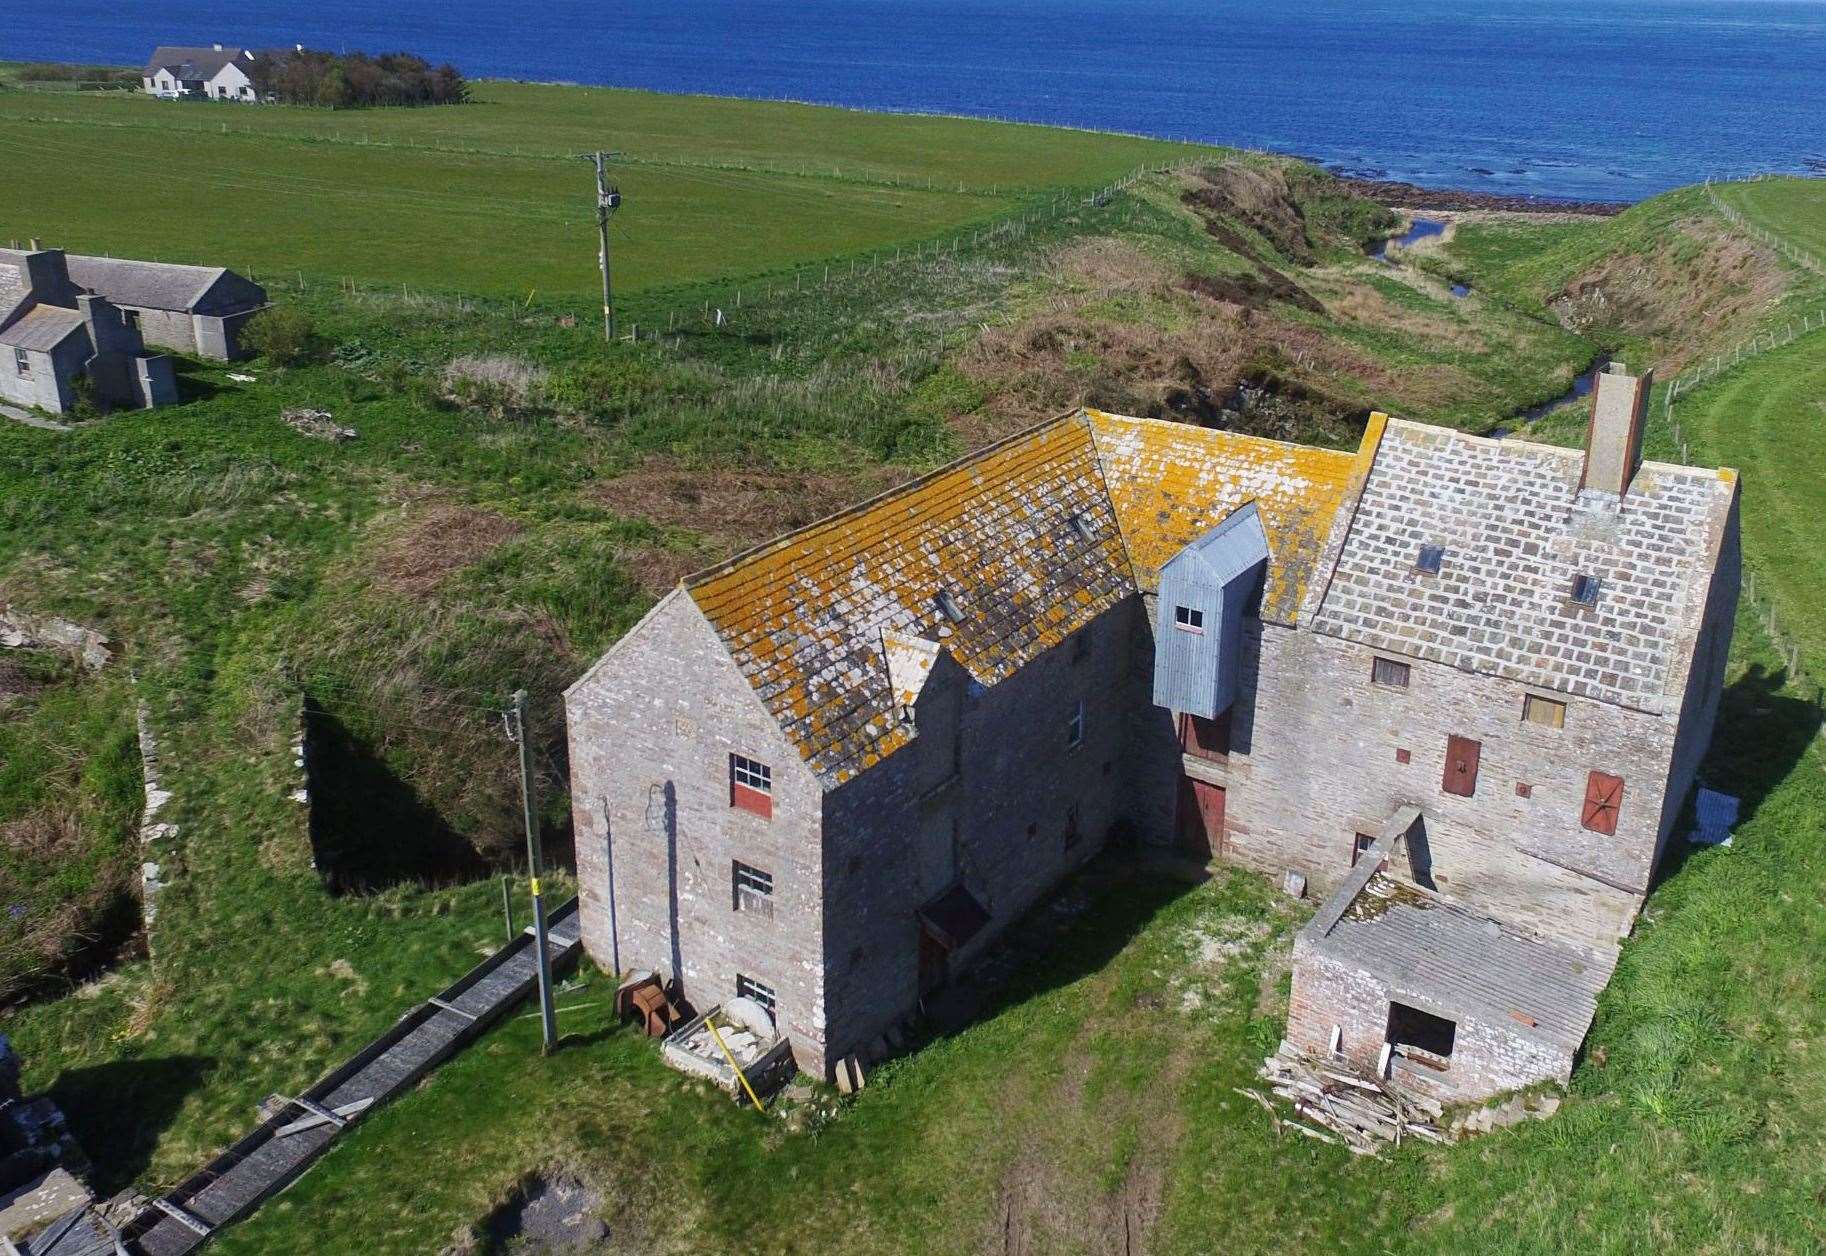 John O'Groats Mill Trust wants to turn the historic building into a social, educational and cultural centre.